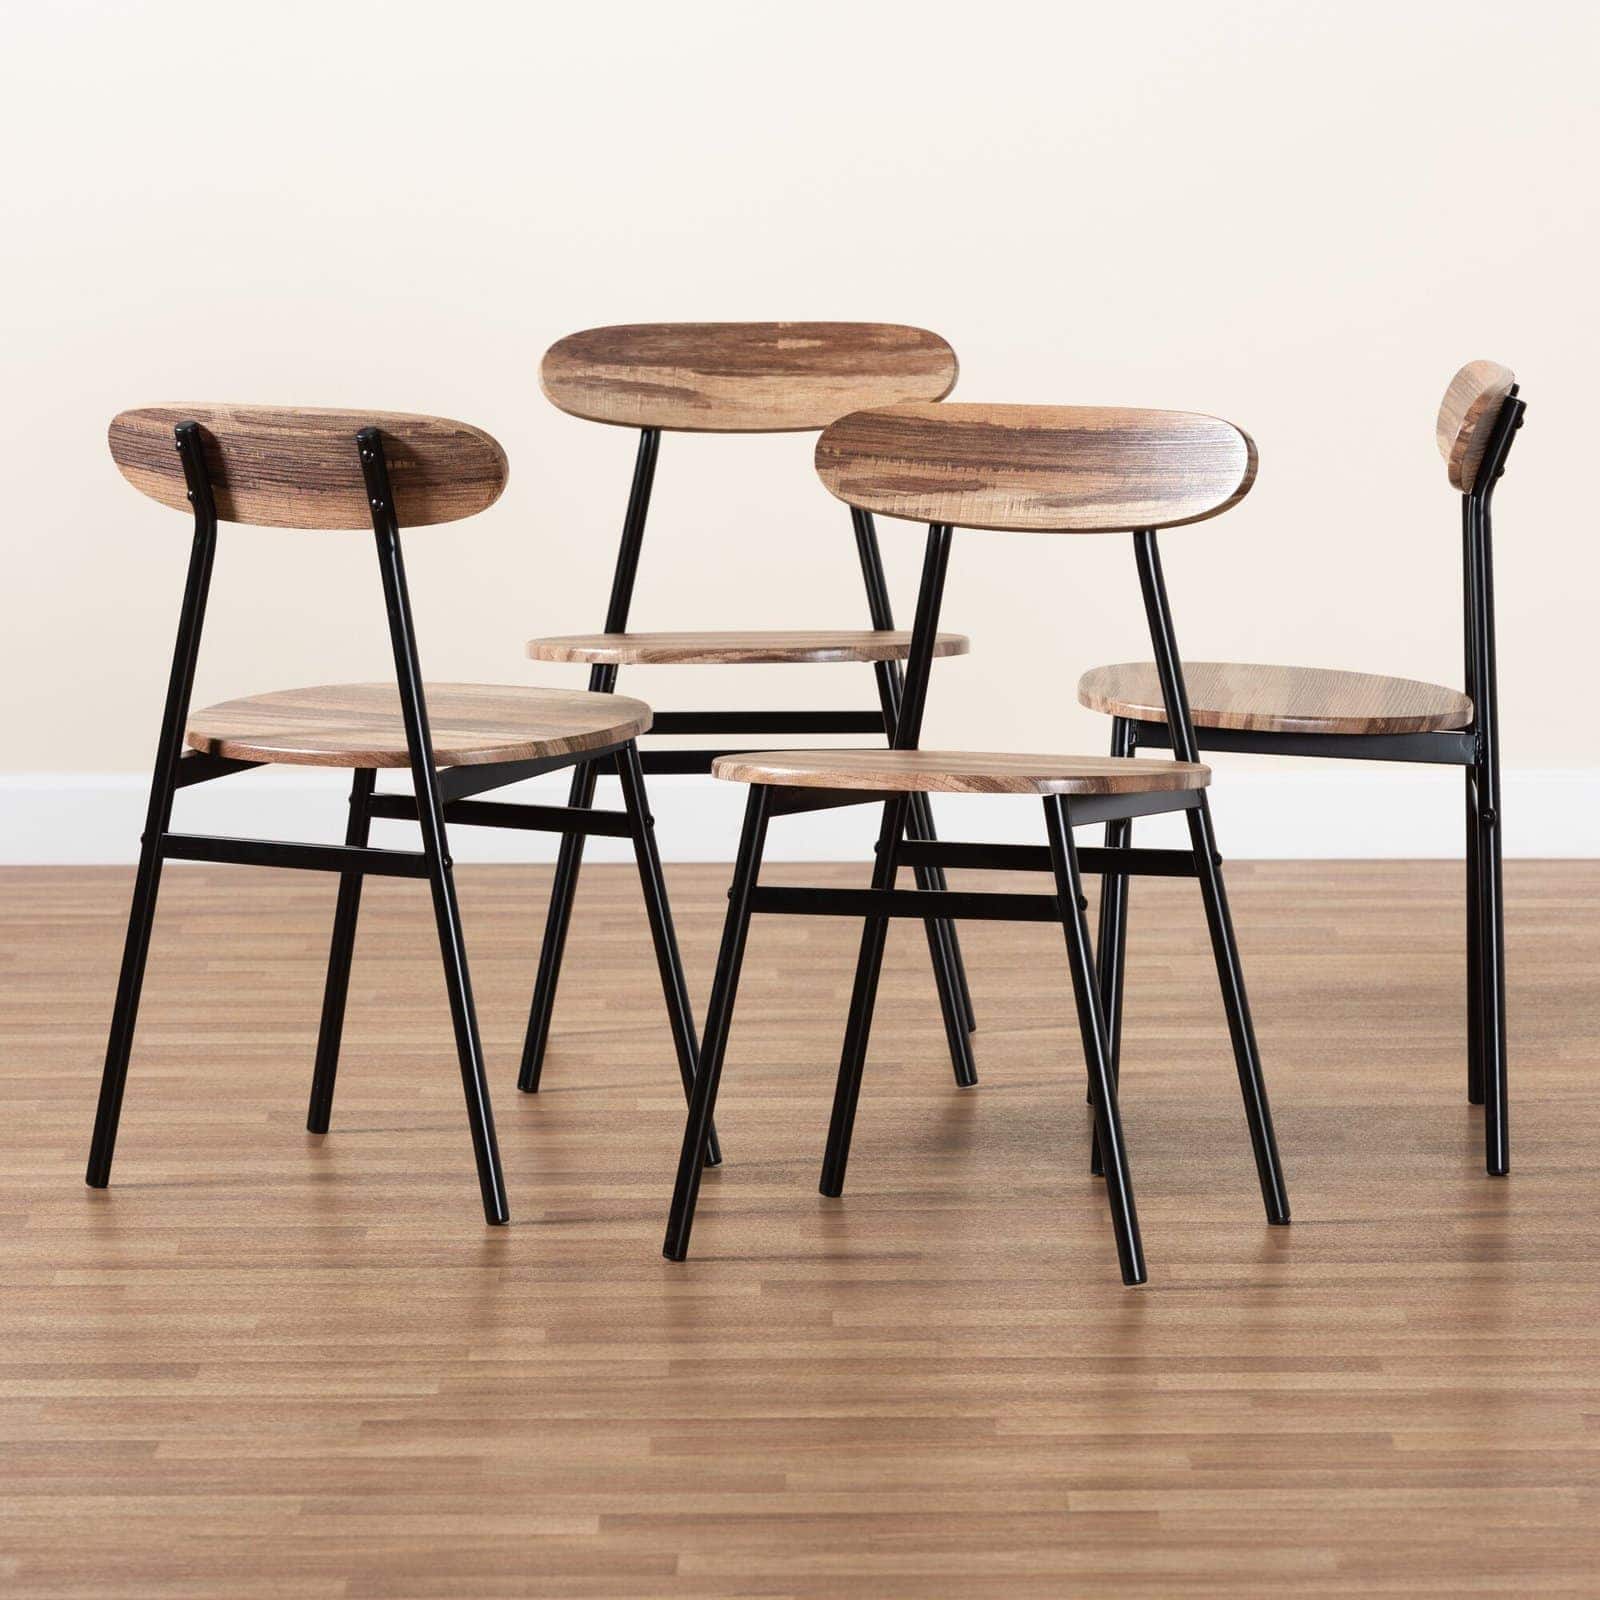 Line Your Table with These Wood and Metal Chairs